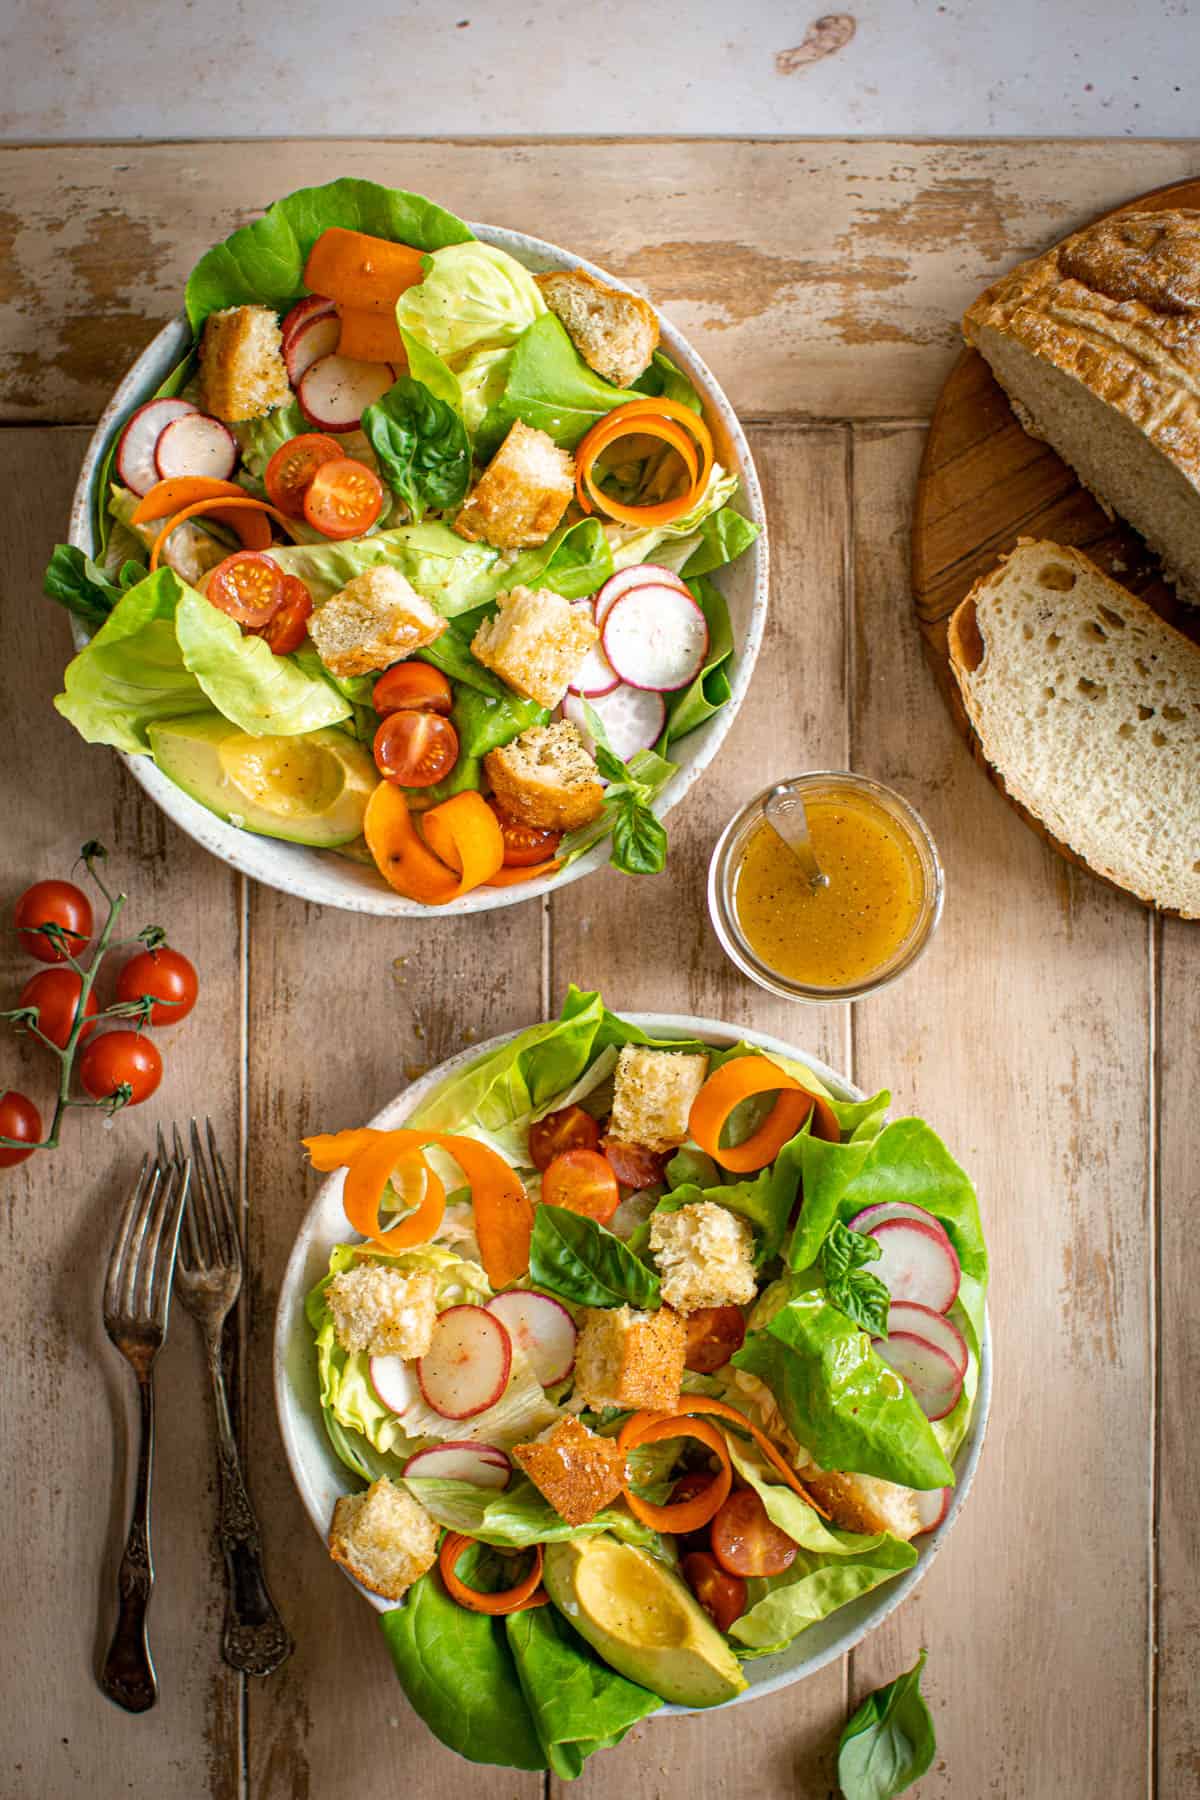 Fresh garden salad with croutons.